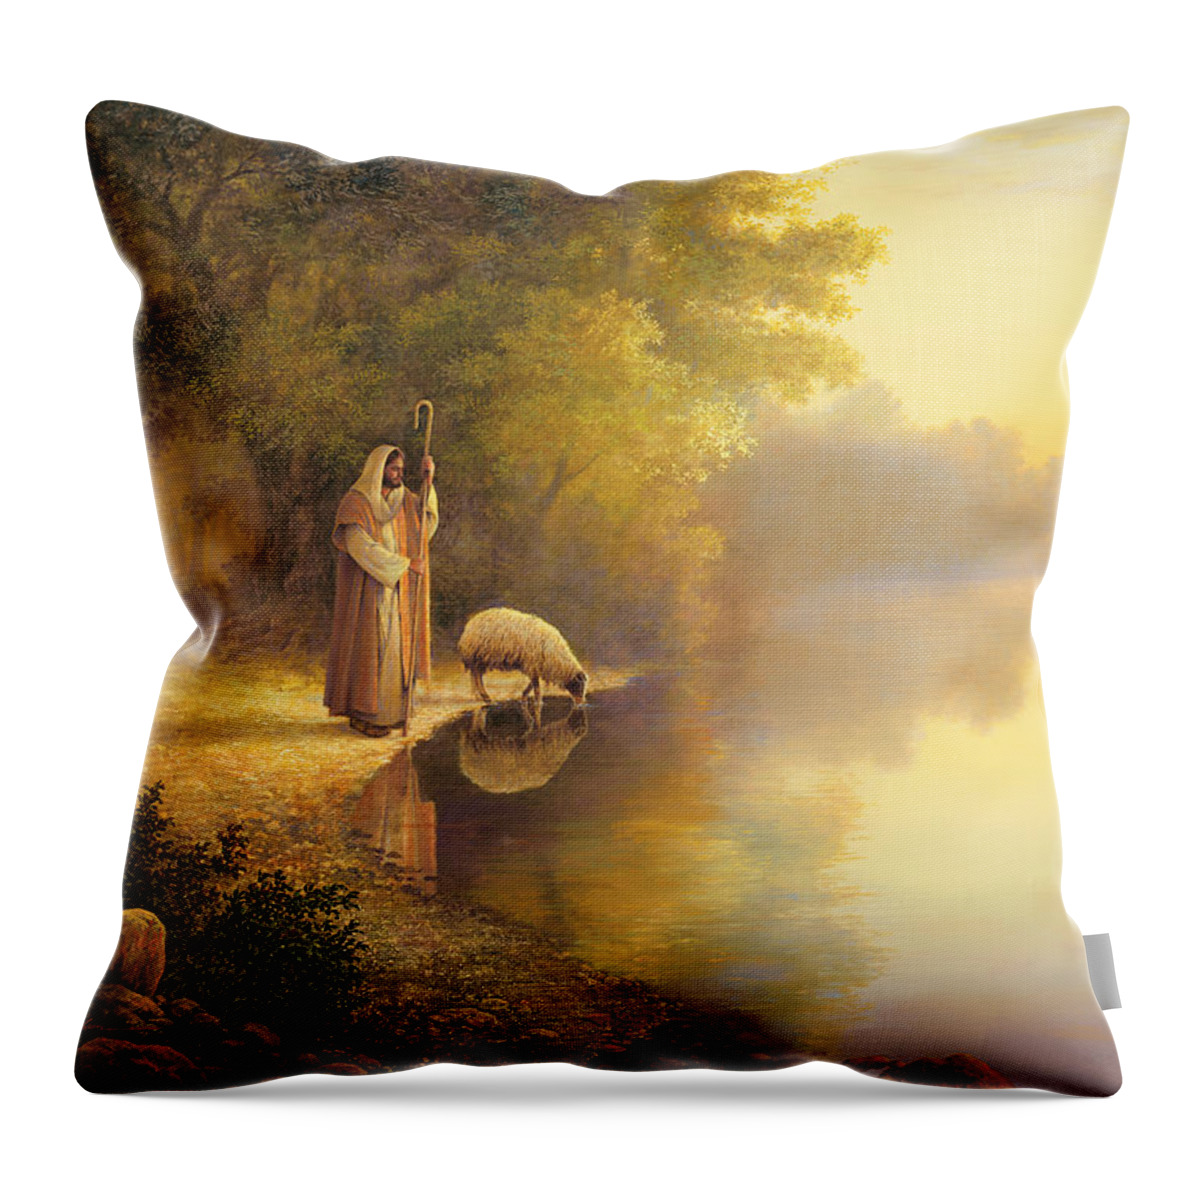 Jesus Throw Pillow featuring the painting Beside Still Waters by Greg Olsen